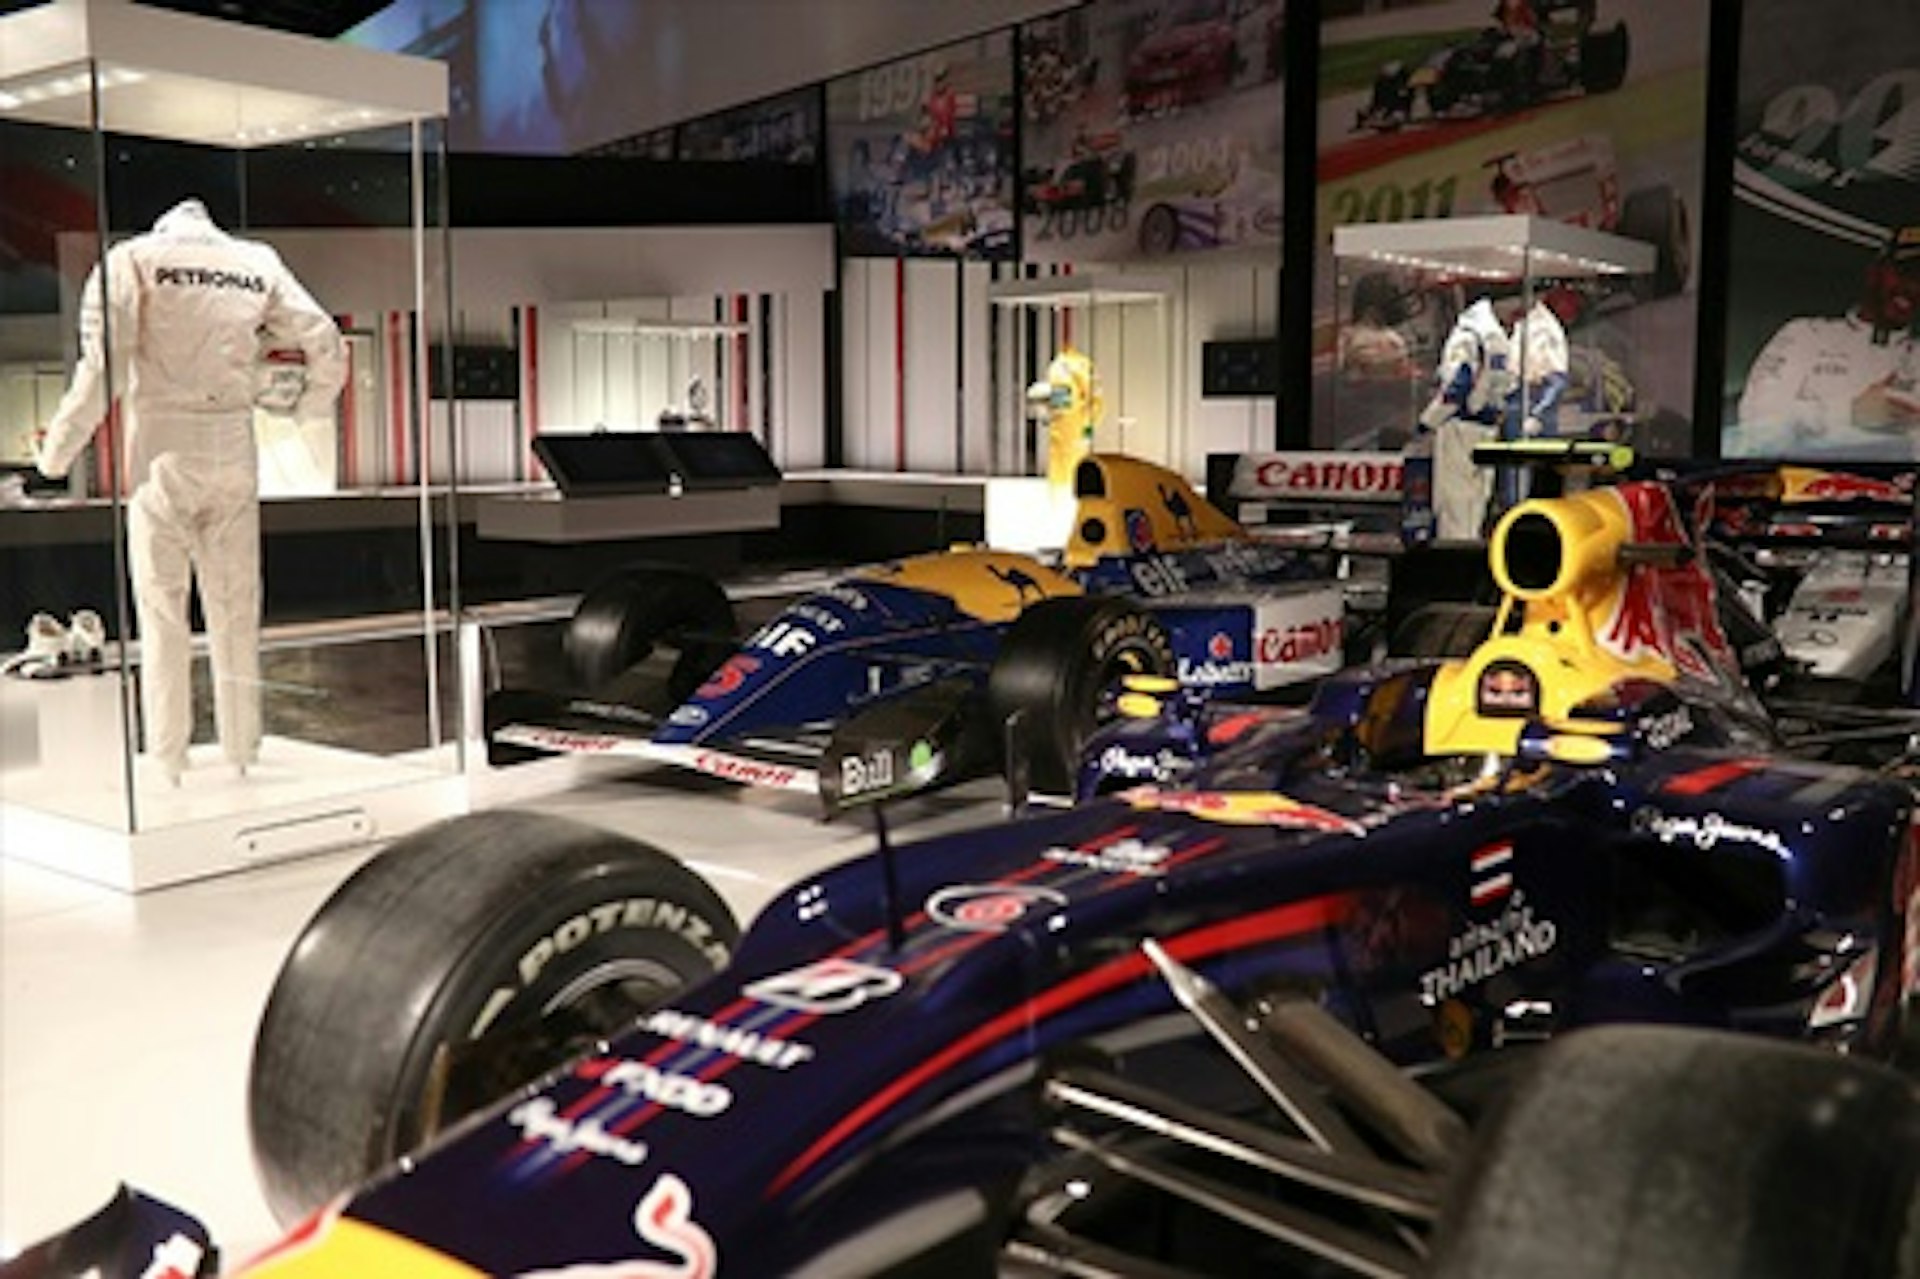 Family Visit to The Silverstone Interactive Museum - An Immersive History of British Motor Racing 2